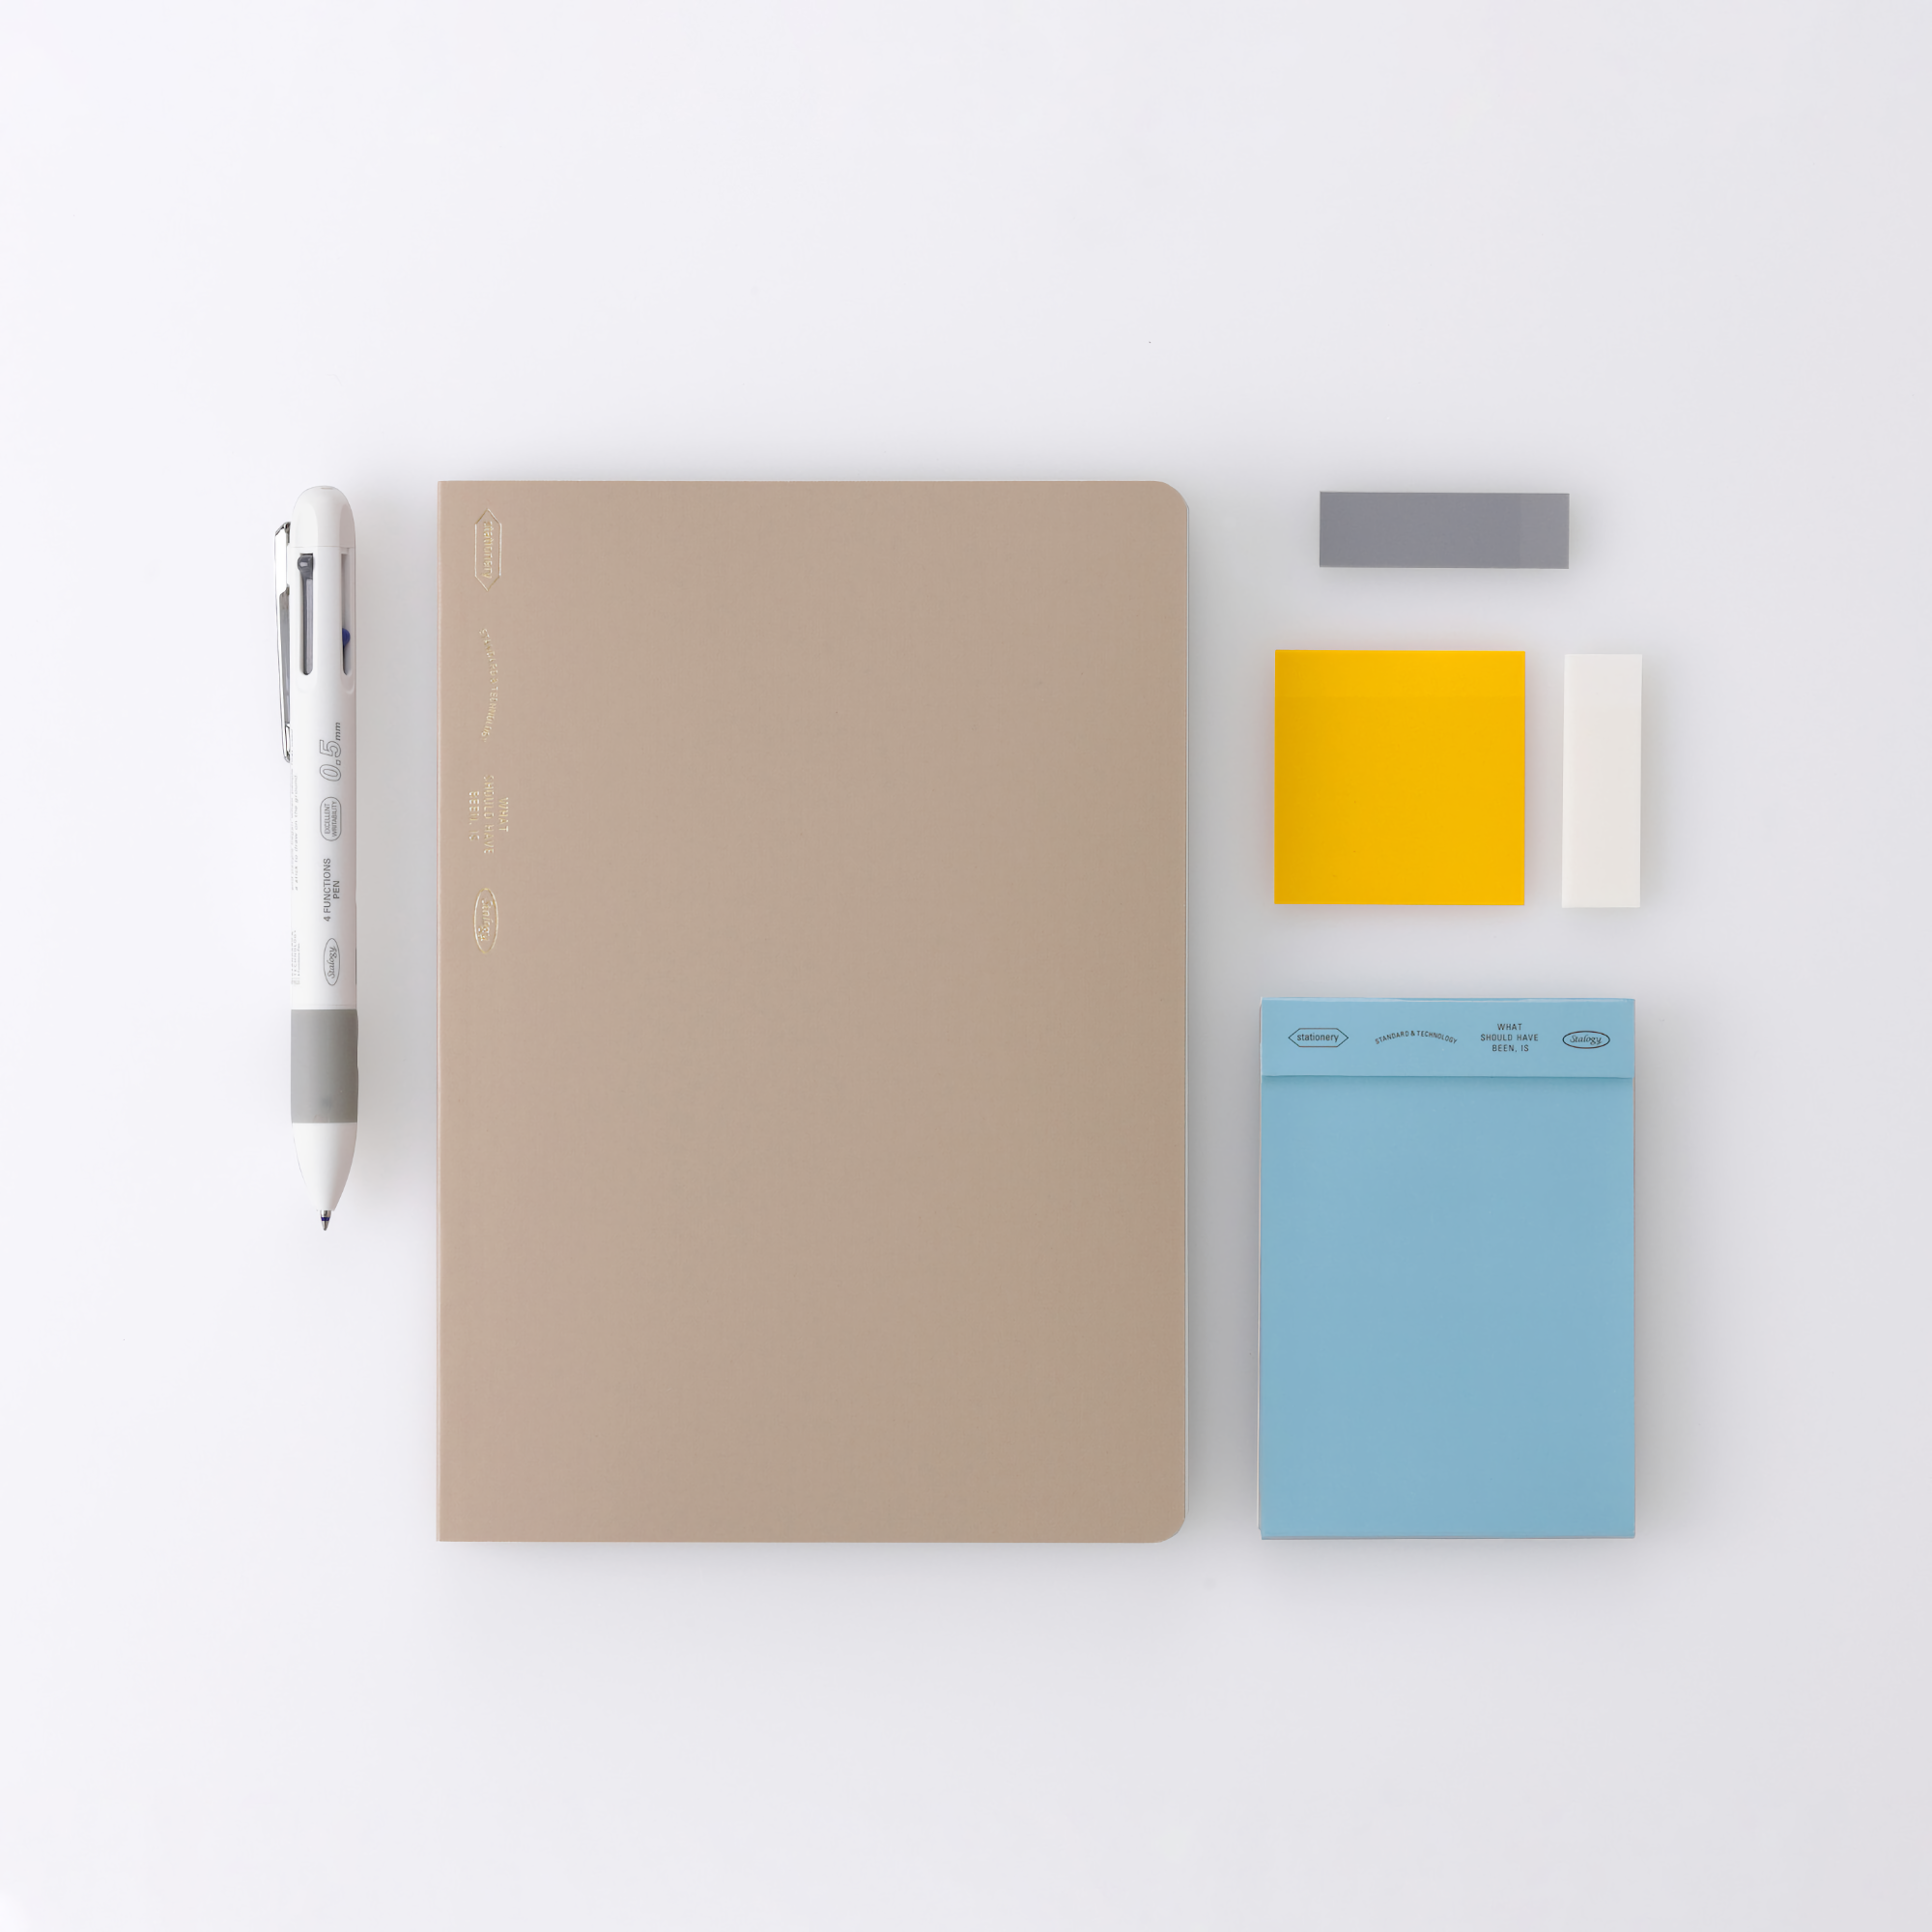 Stálogy 018 365 Days Notebook [A5] Cappuccino Beige [Limited Edition]